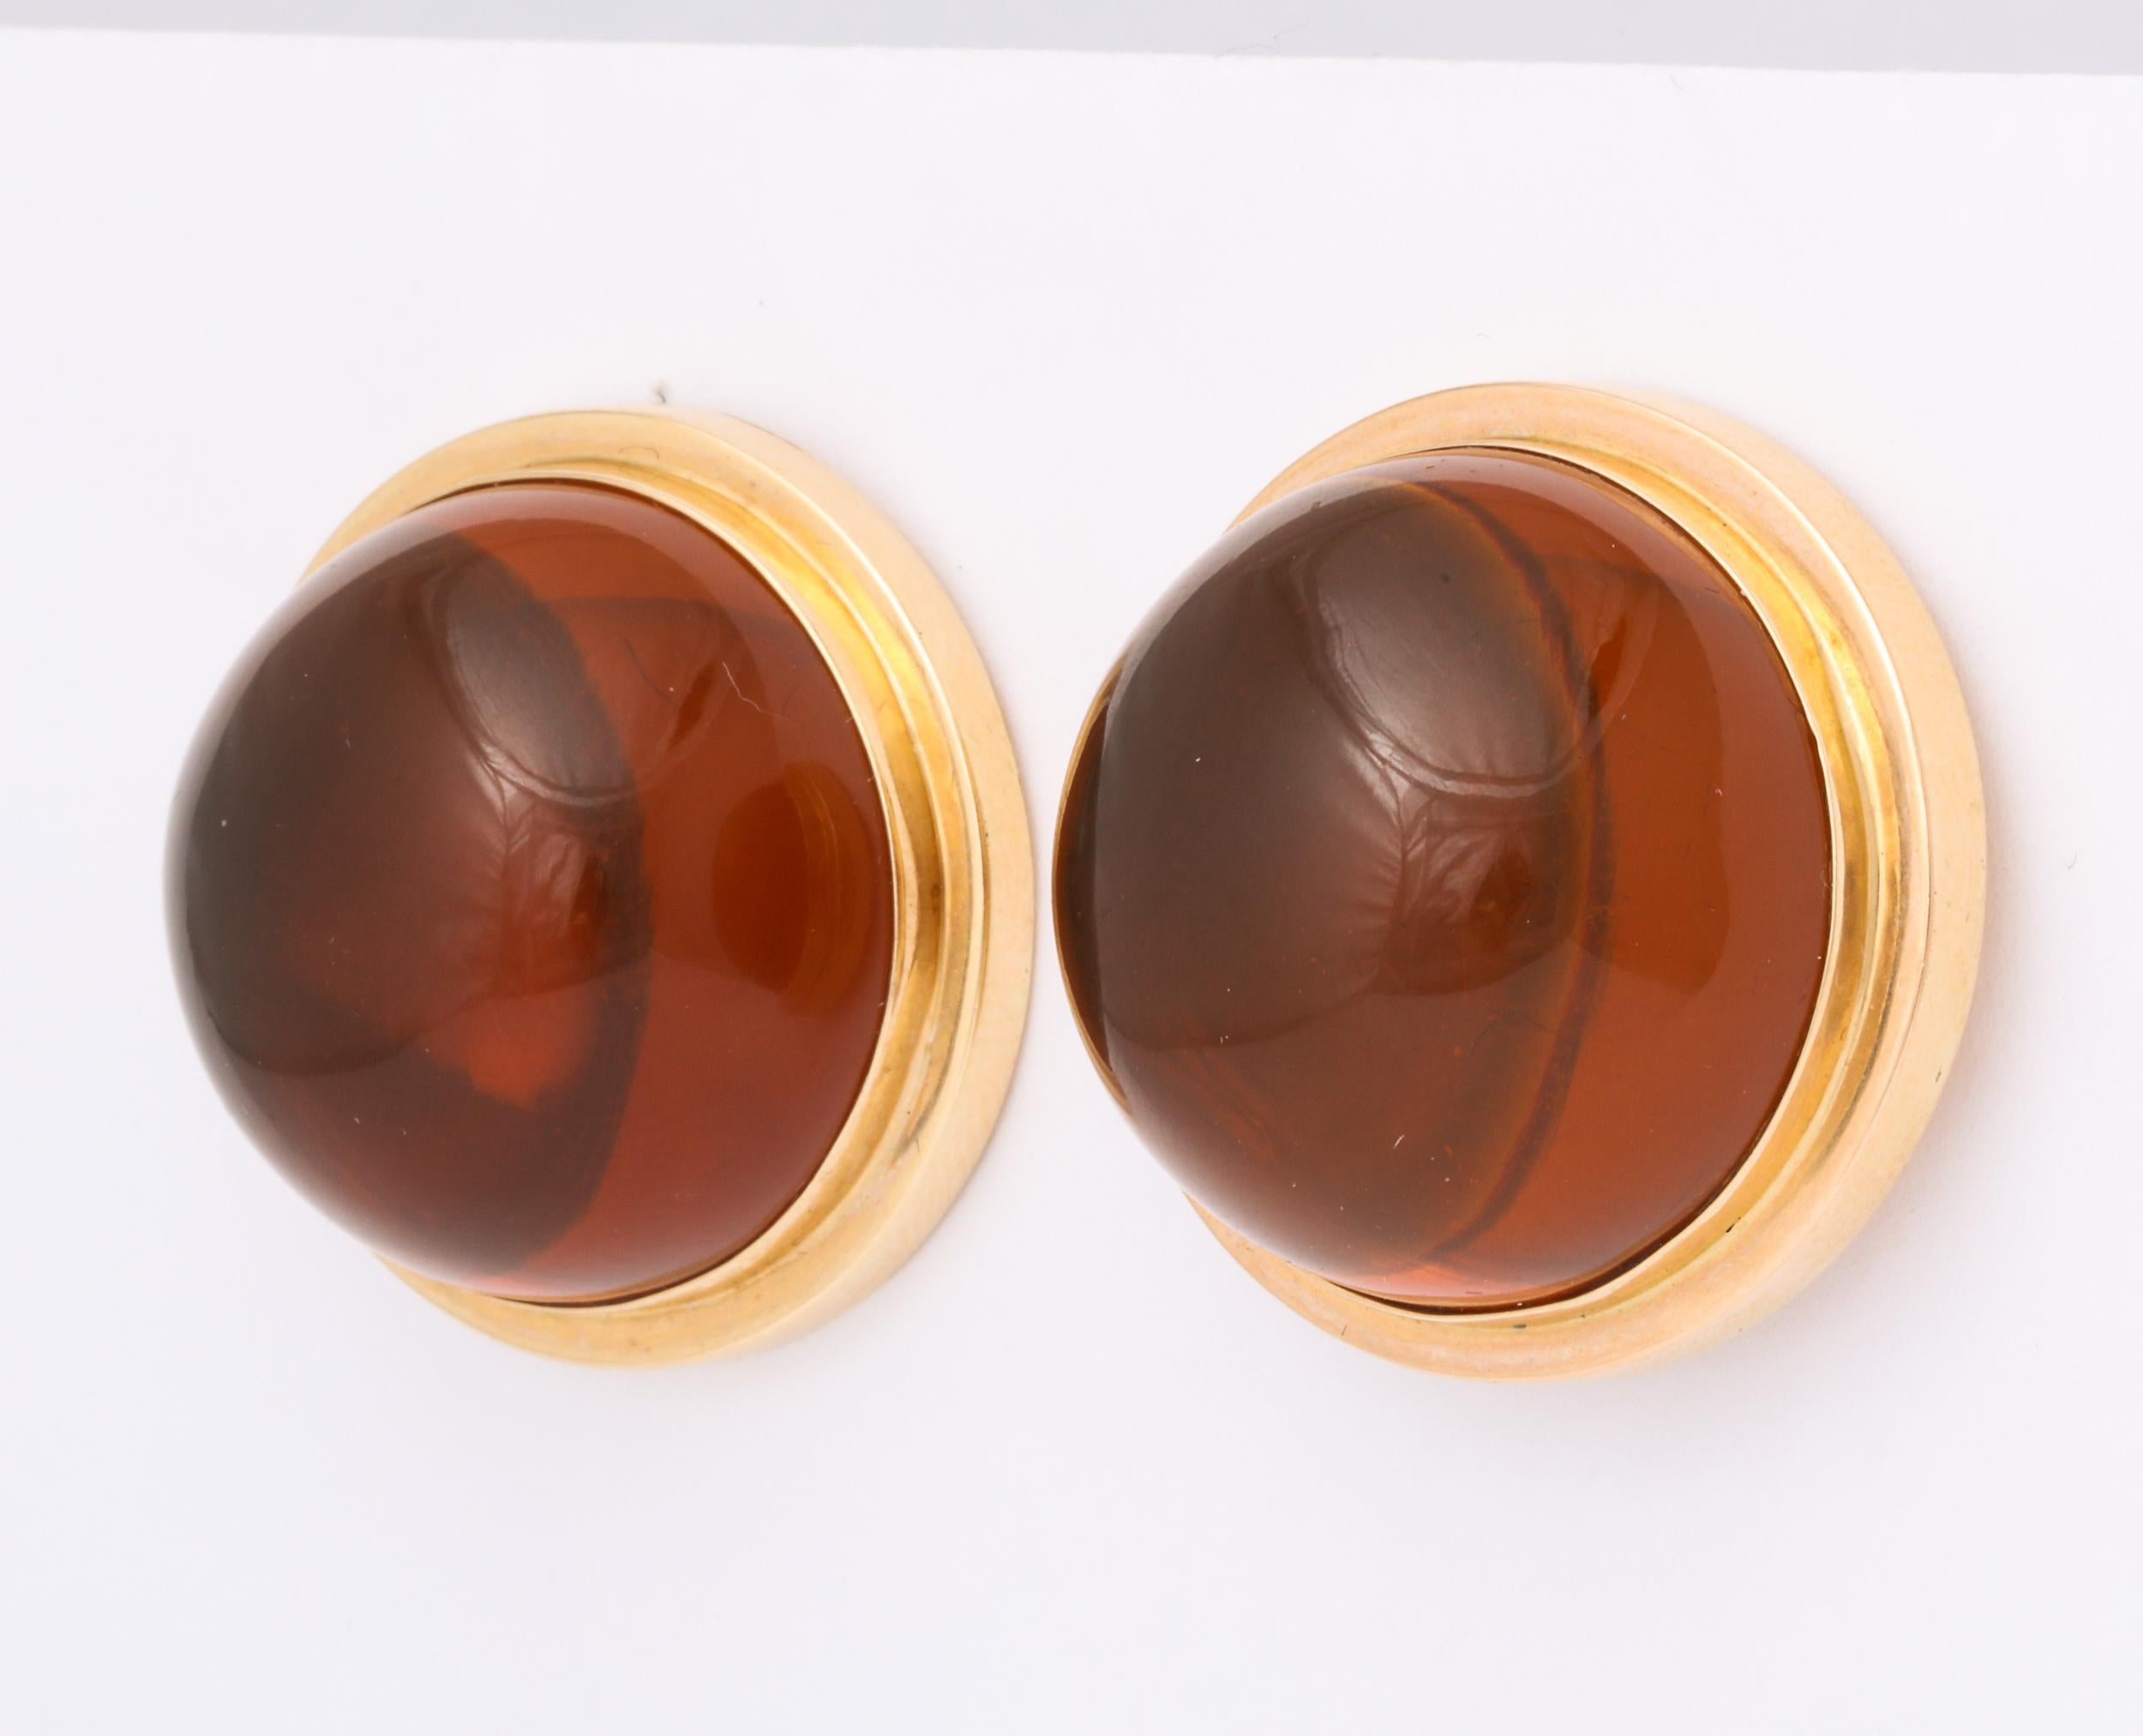  Reconstituted and polished Amber Beads set in double stepped   18kt Yellow Gold bezel mounting.  Clip on with Omega Backs. Marked 18kt.  Large scale -  Beads measure 26mm. Bold look and very rich.  Can be converted to pierced.  They are a match to